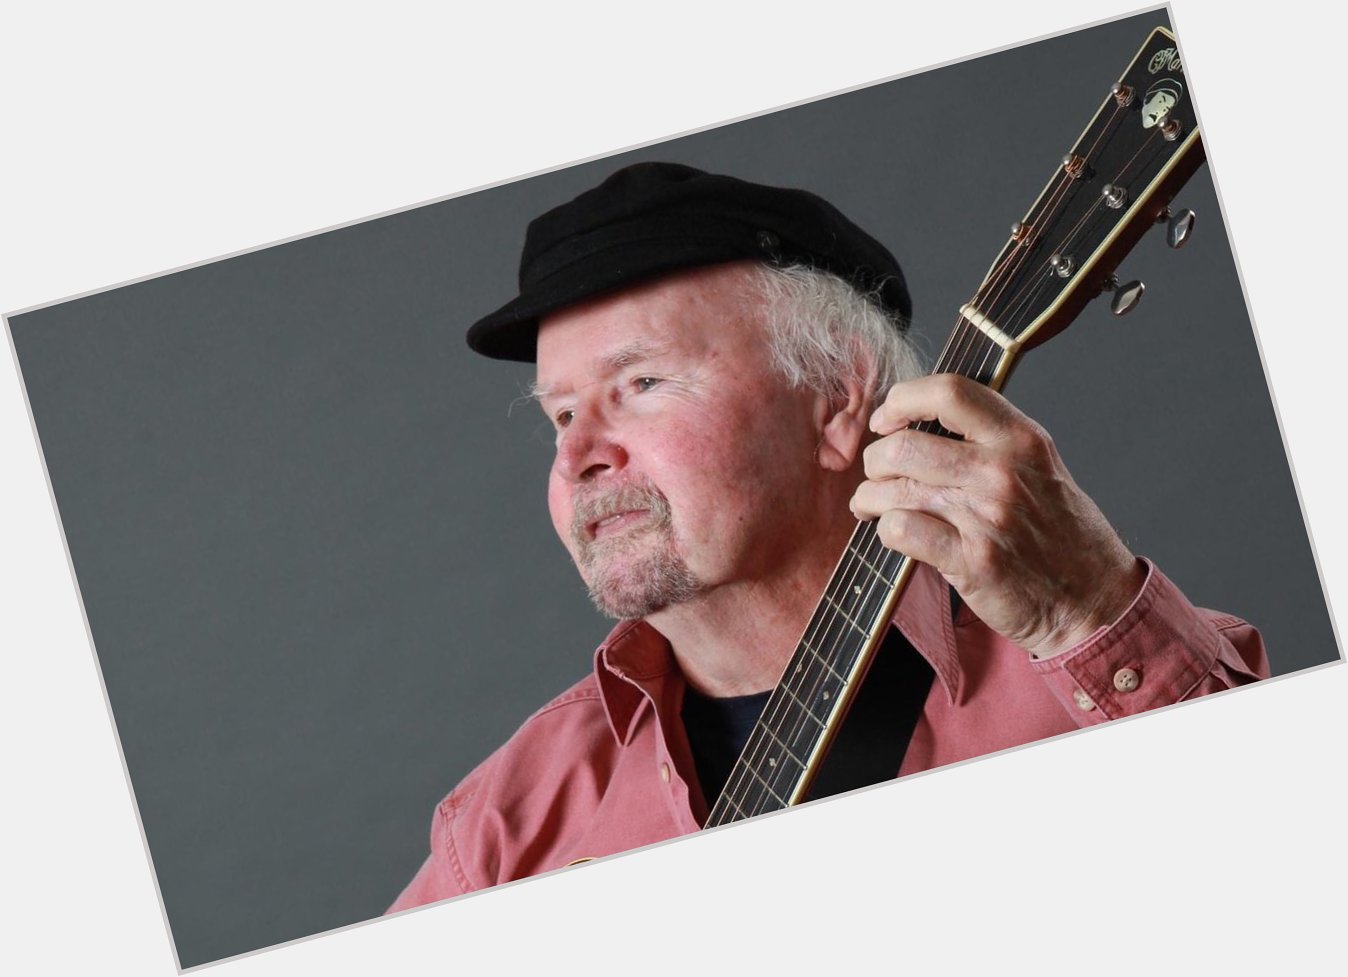 Join us in wishing Tom Paxton a very Happy 83rd Birthday today! 